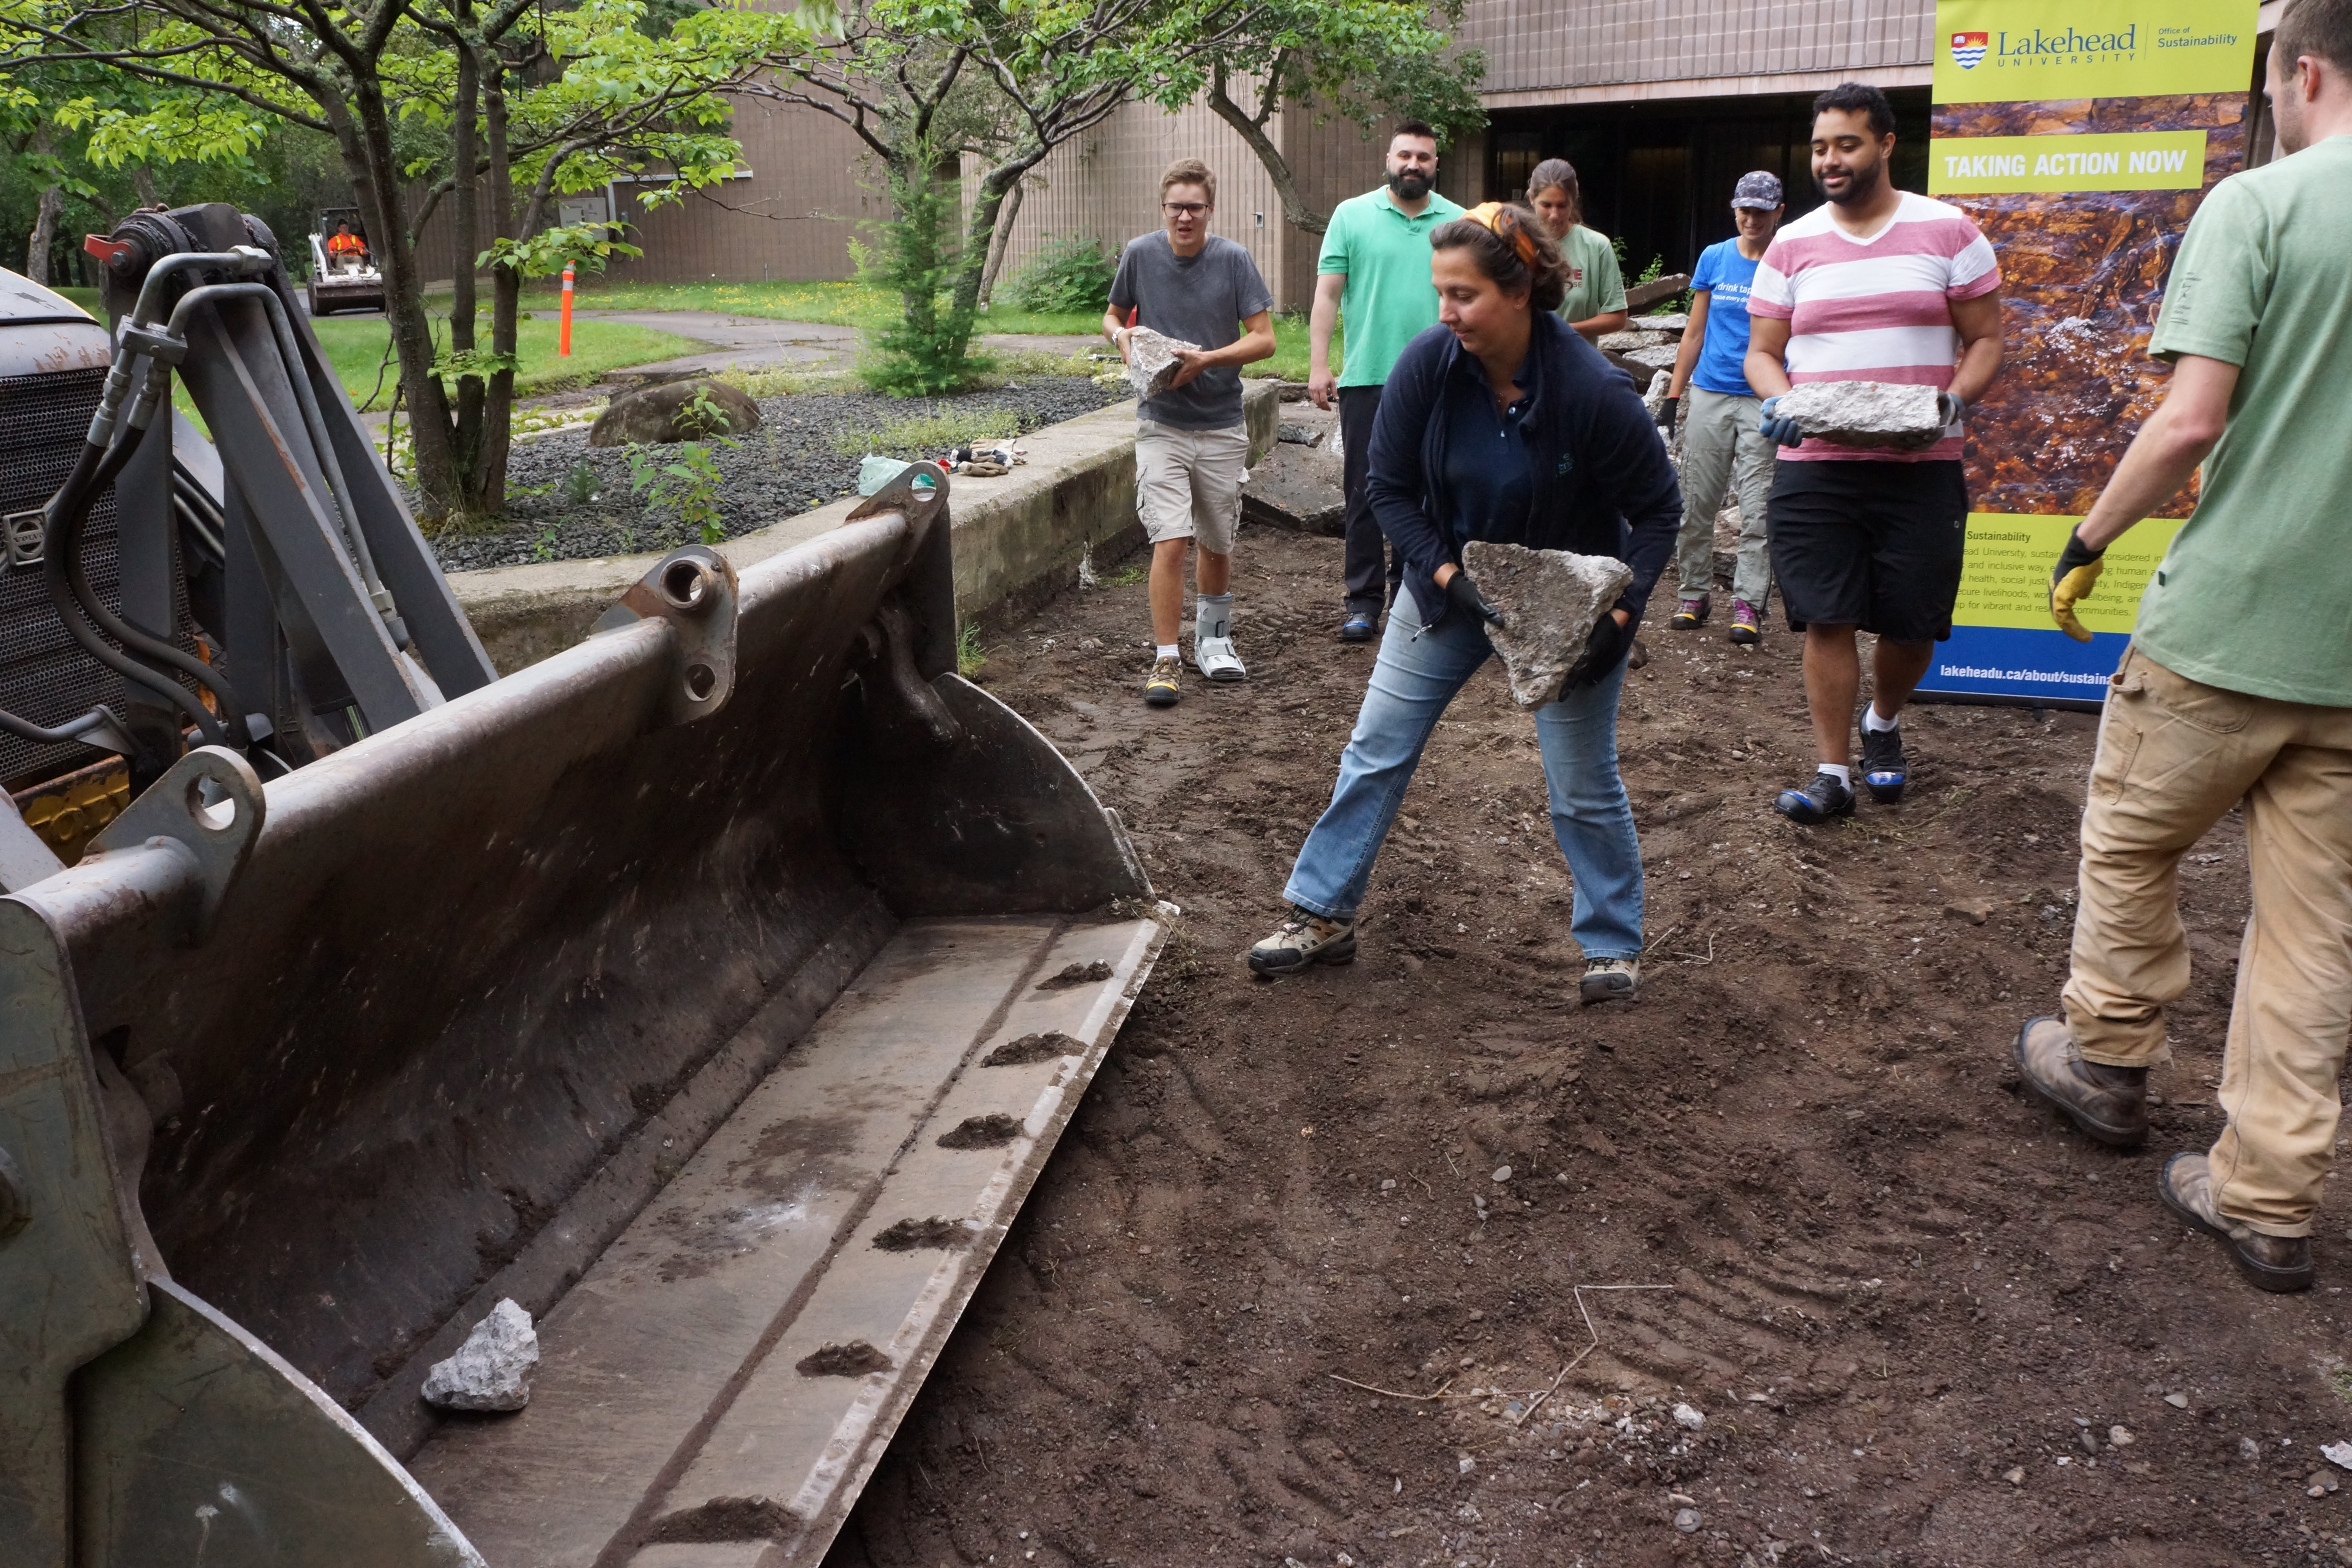 Volunteers removing old debris from the space